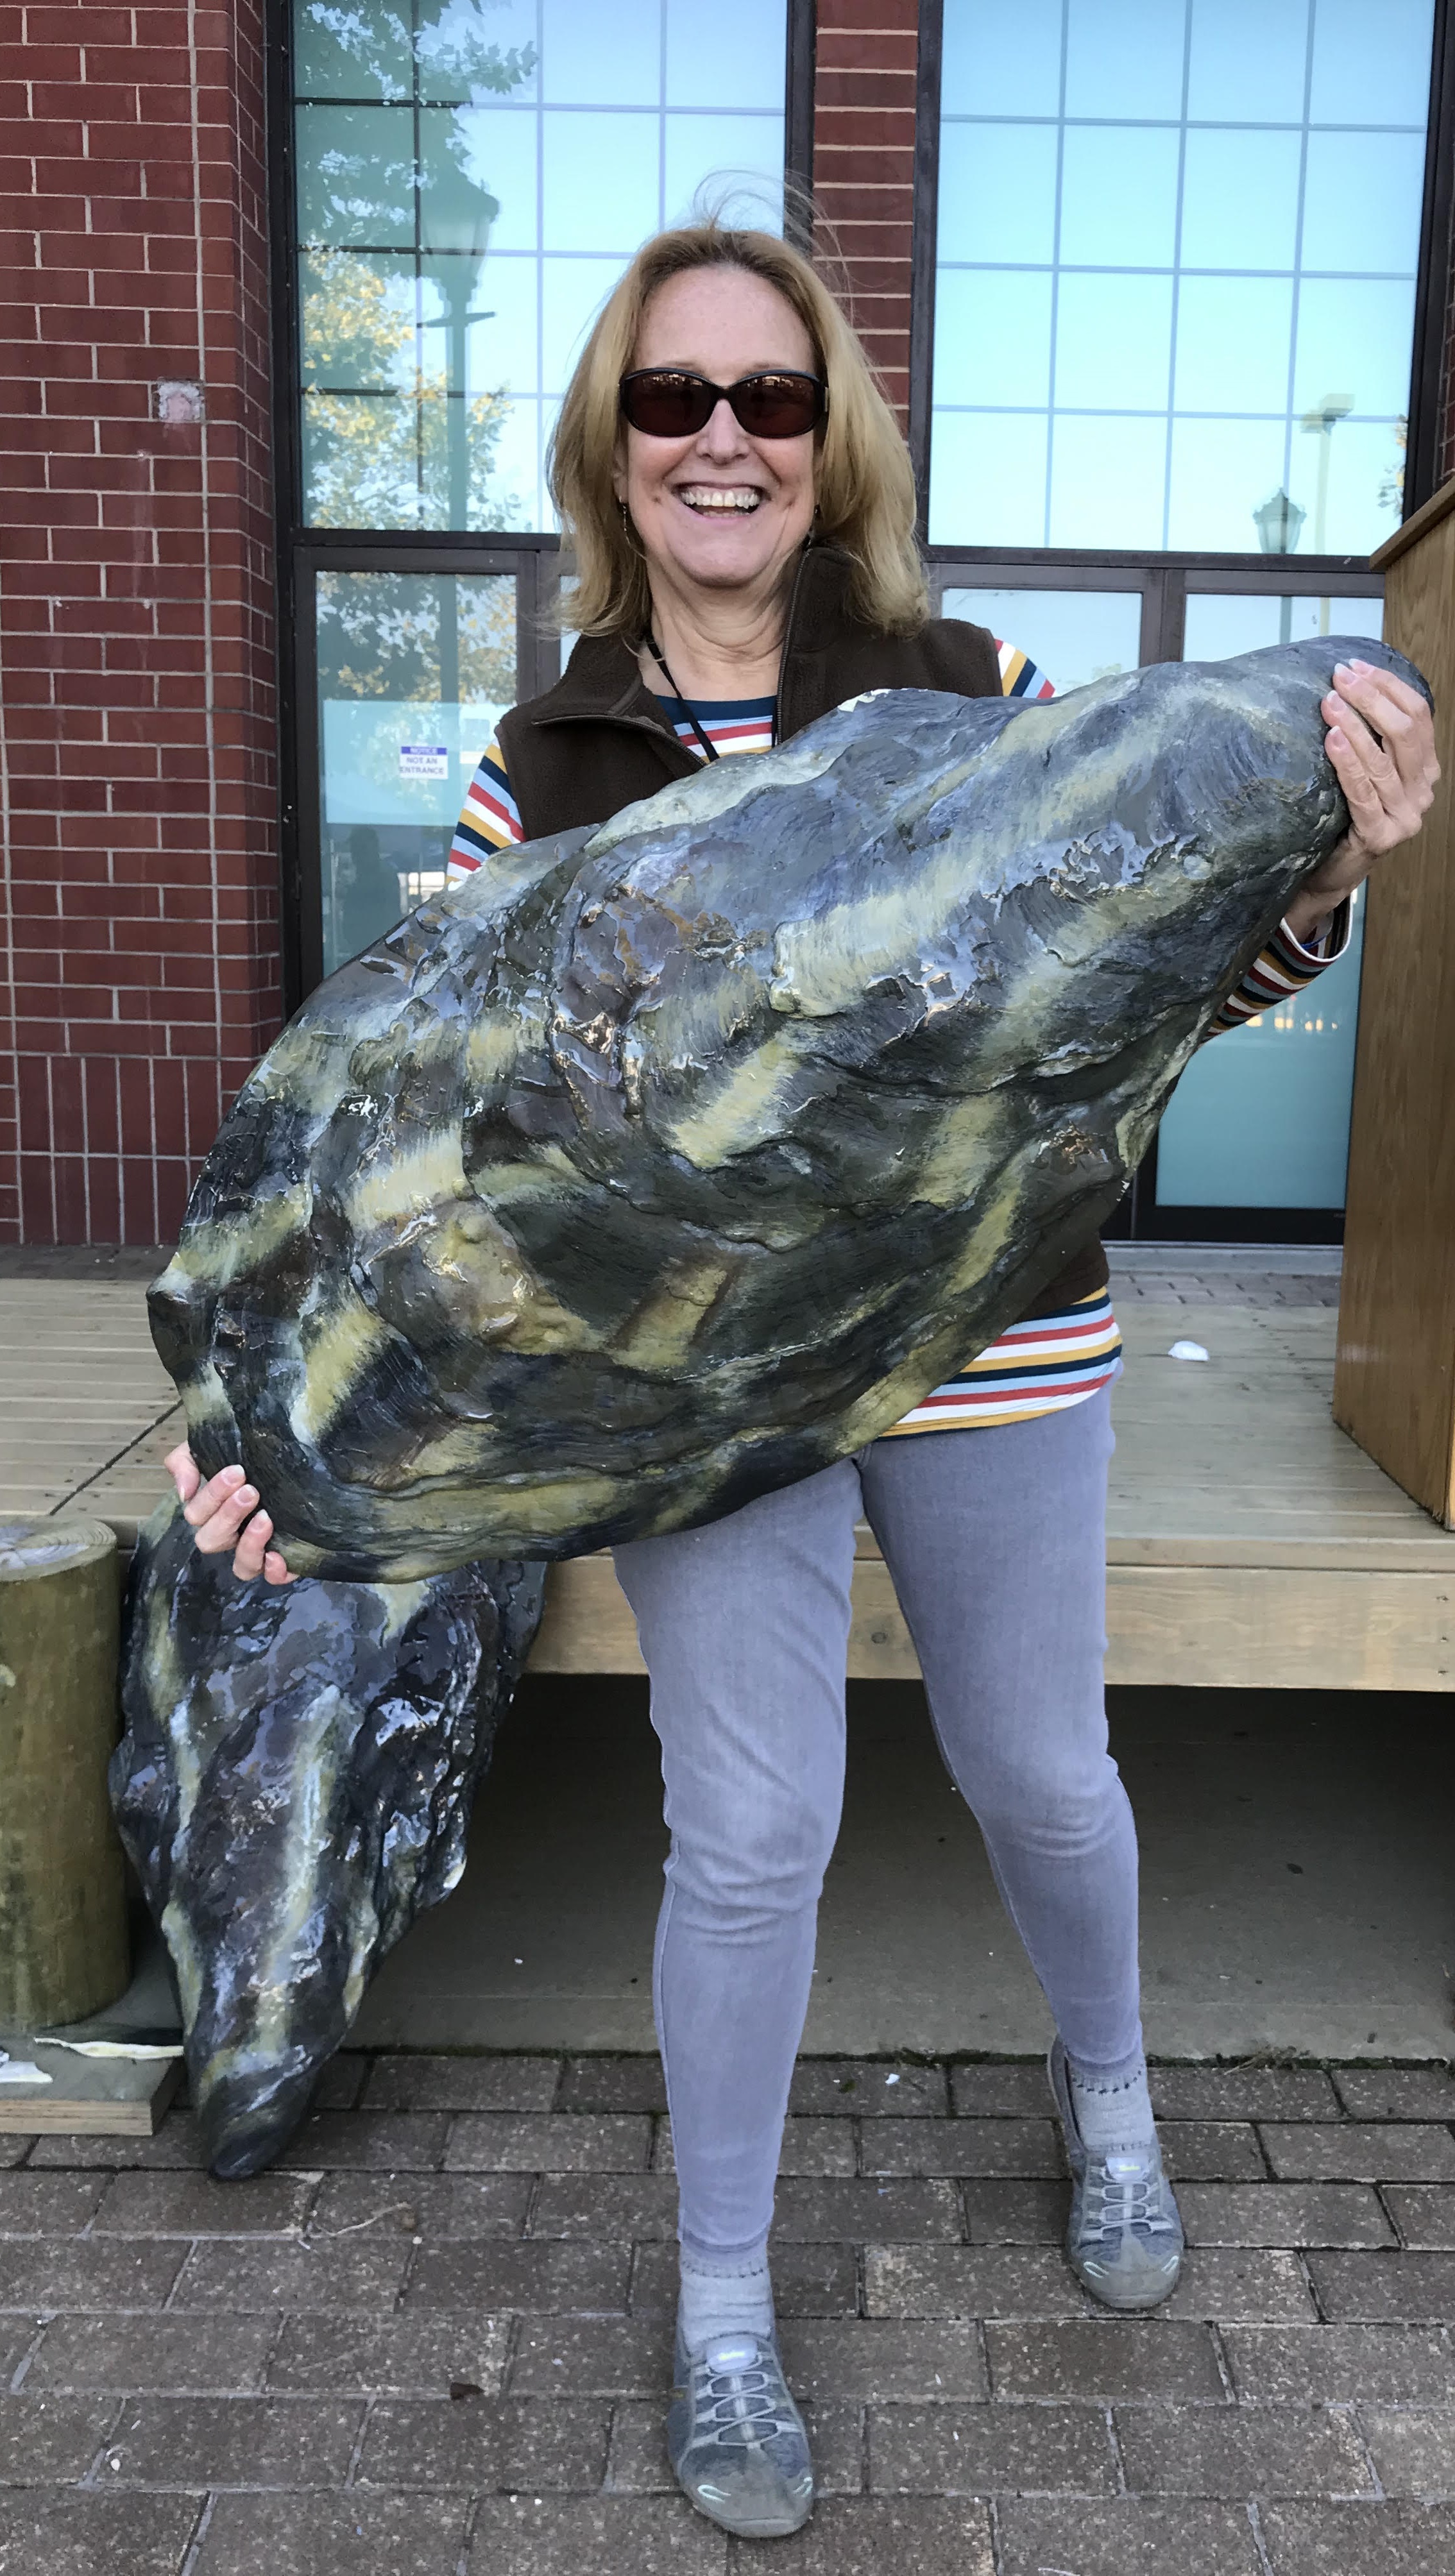 Maureen Dunn, a water quality scientist with Seatuck Environmental Association on Long Island, holds a prop of an enlarged oyster shell at the Blue Point Brewery’s Oyster Ball.